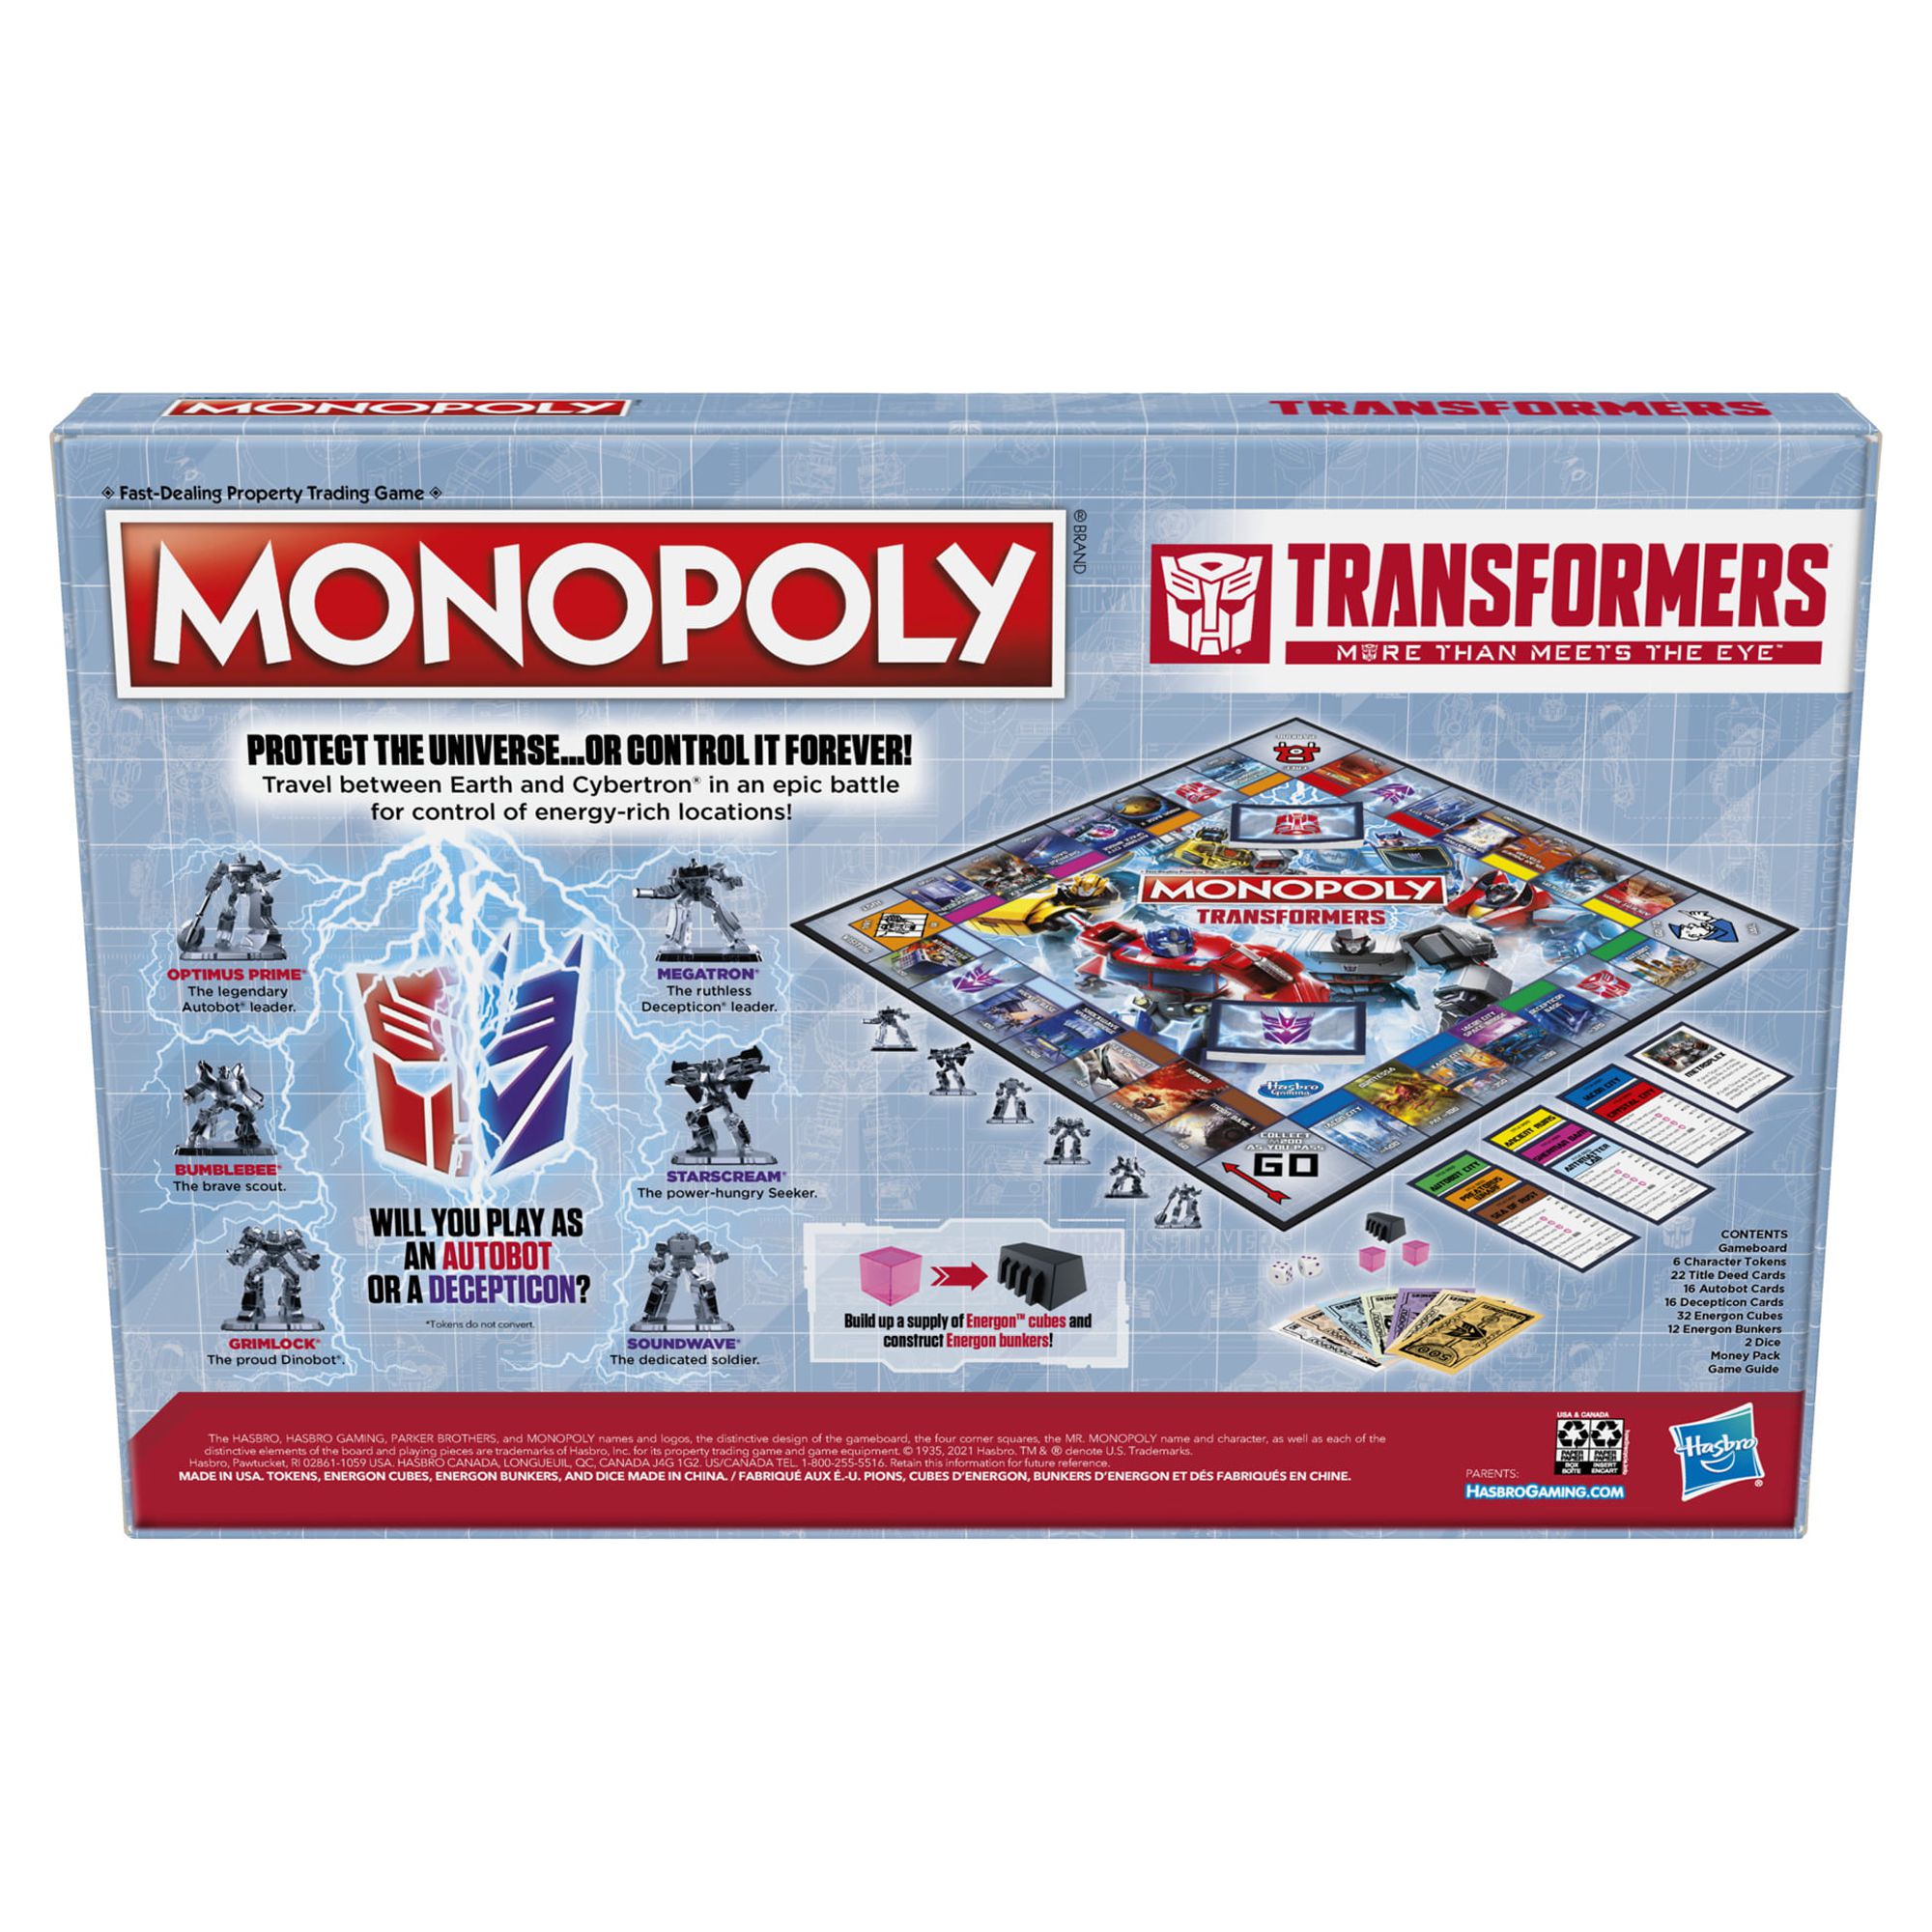 Monopoly Transformers Edition Board Game for Kids and Family Ages 8 and Up, 2-6 Players - image 3 of 7